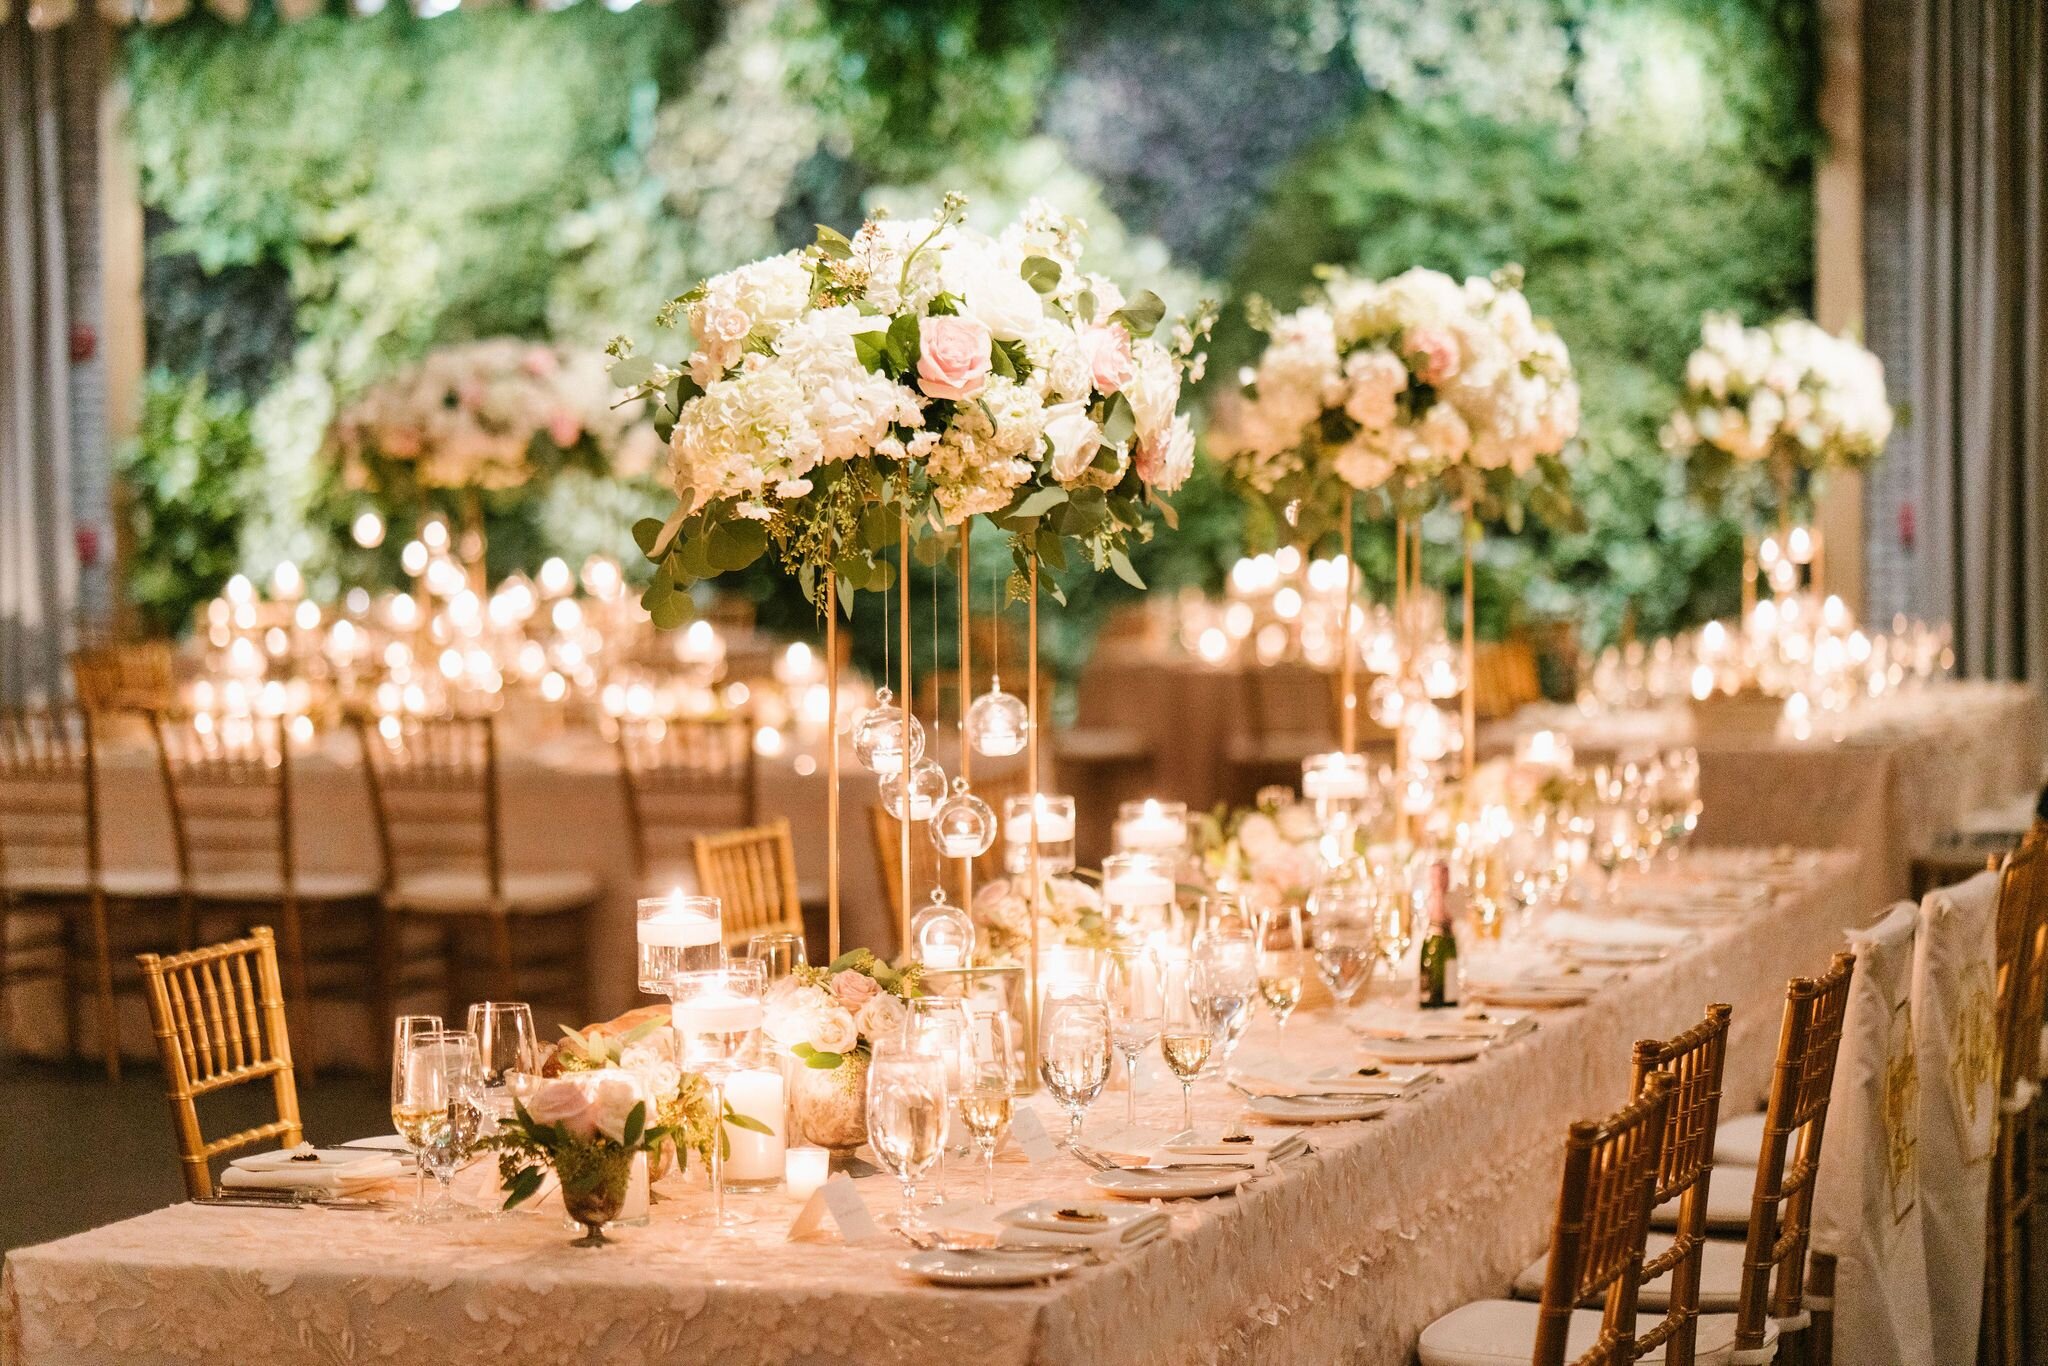 Reasons to hire a wedding planner